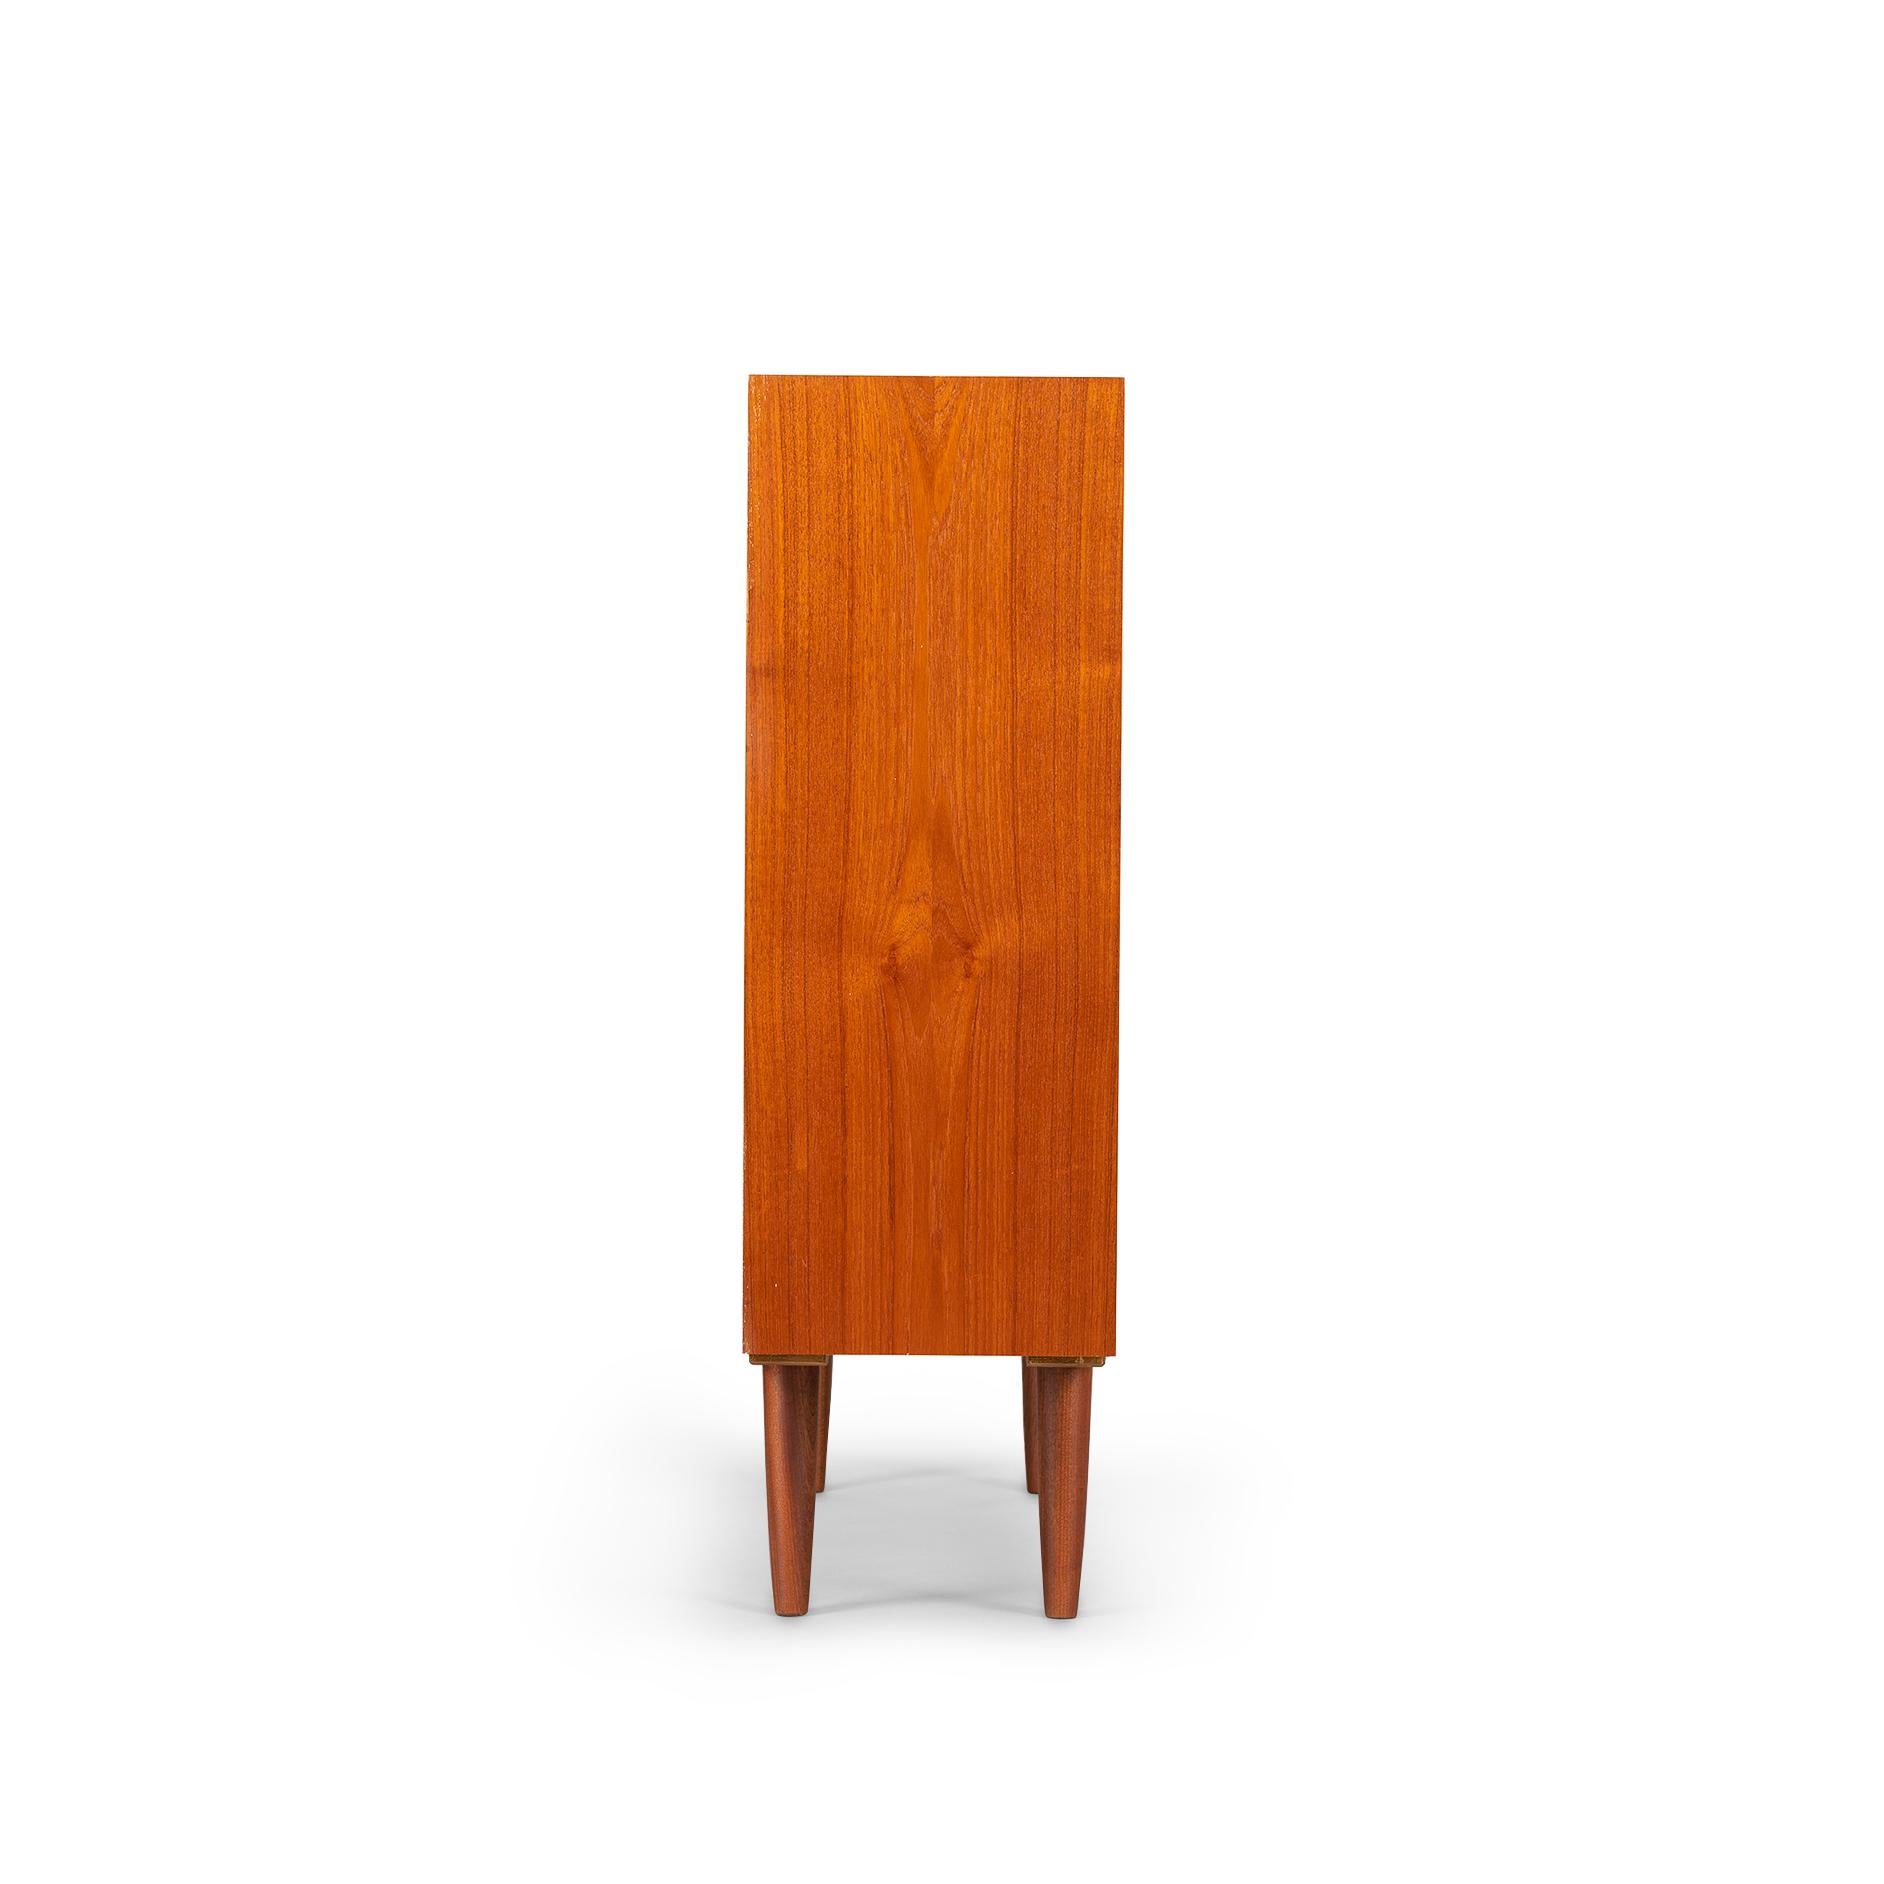 Nice elegant bookcase in teak by design of Kaj Winding for Poul Jeppesens Møbelfabrik from the 1960s. Four truly beautifully crafted hardwood drawers with signature Winding grips line the top of the bookcase which further comprises four height